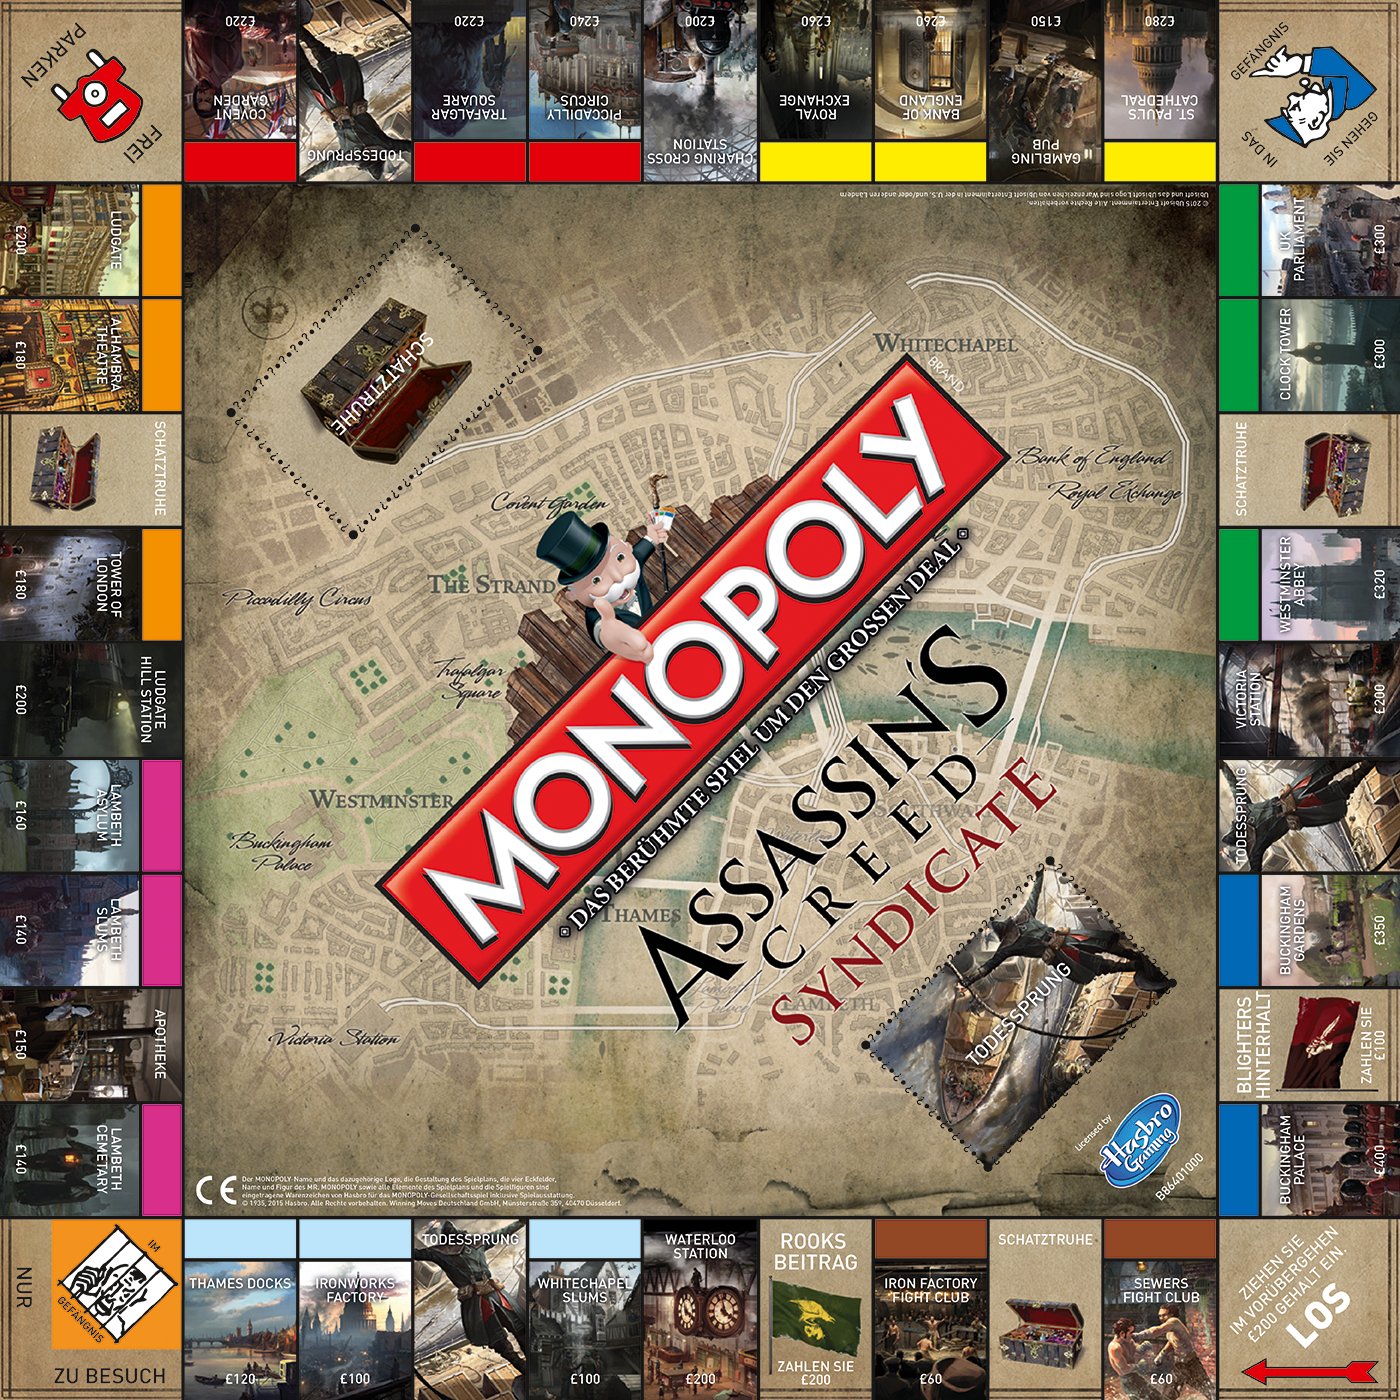 Monopoly Assassin's Creed Syndicate